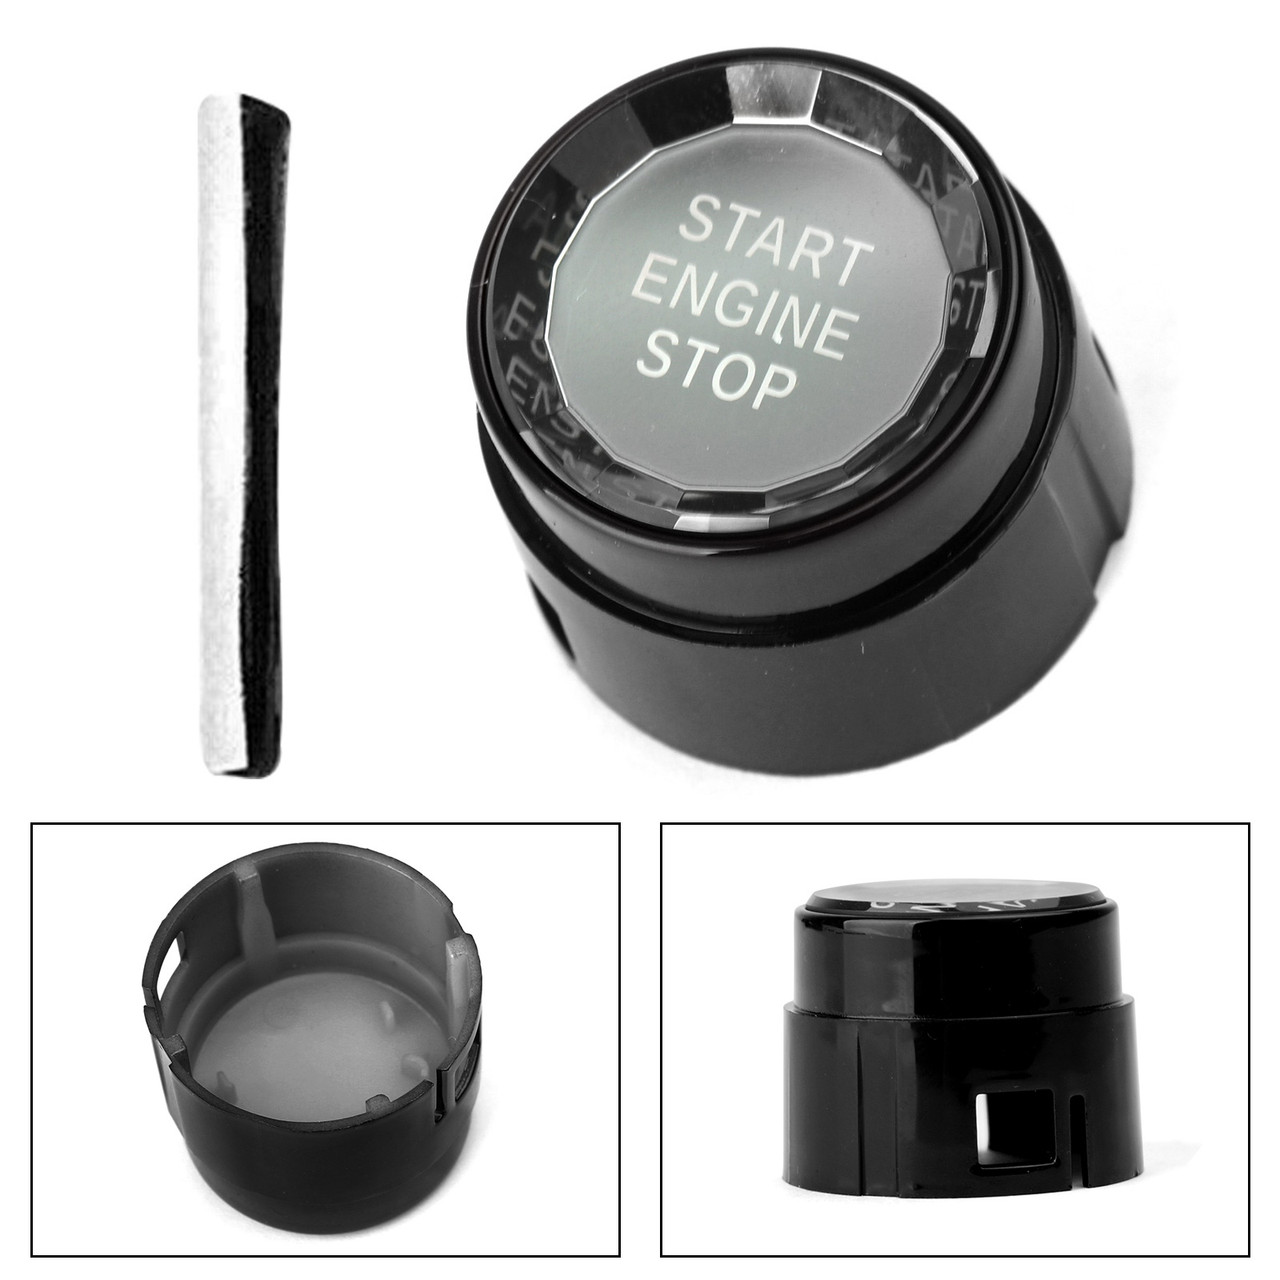 Start Stop Engine Push Button Switch Cover Crystal For BMW 1 Series F20 F21 12-16 Black